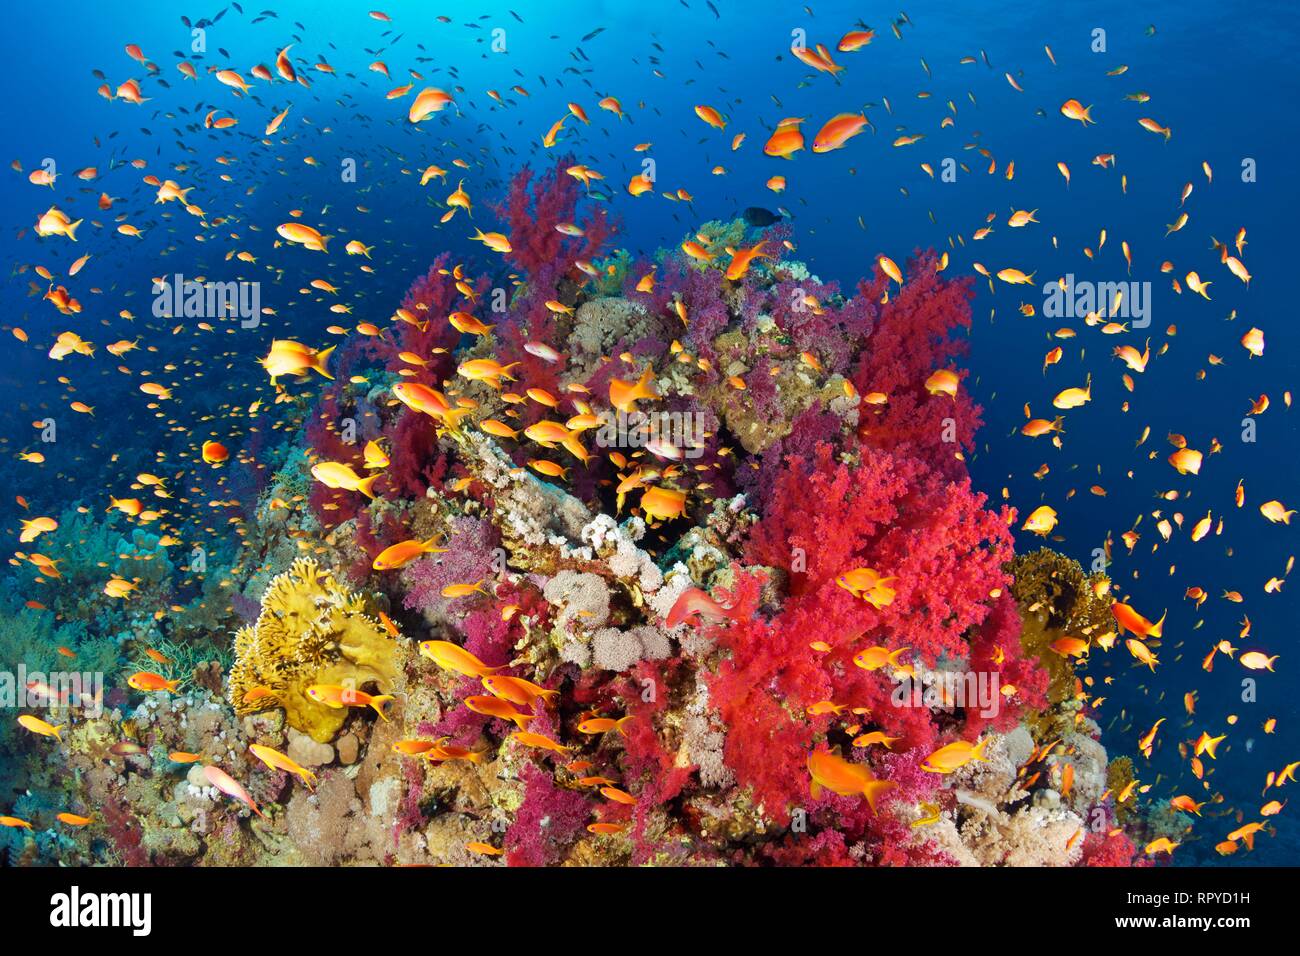 Coral reef, reef block overgrown with Klunzinger's Soft Corals (Dendronephthya klunzingeri) and various stone corals Stock Photo